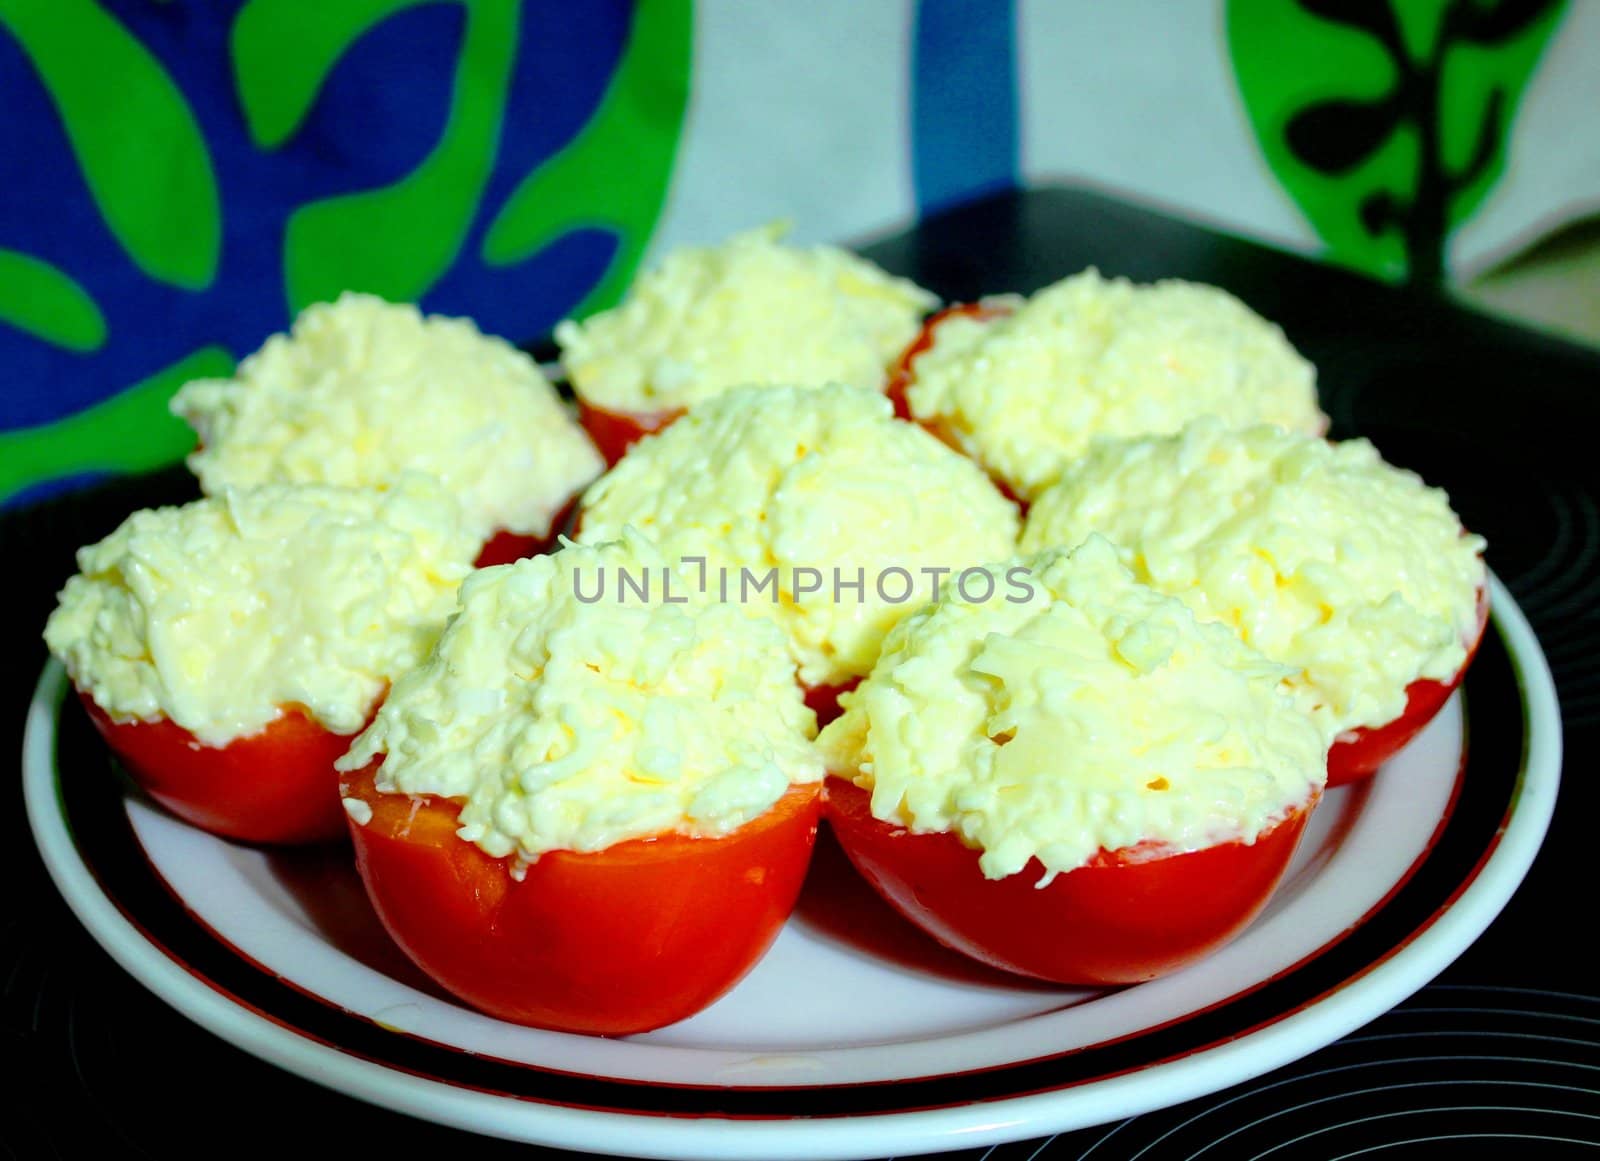 Tomatoes with cheese snack Jewish on a plate